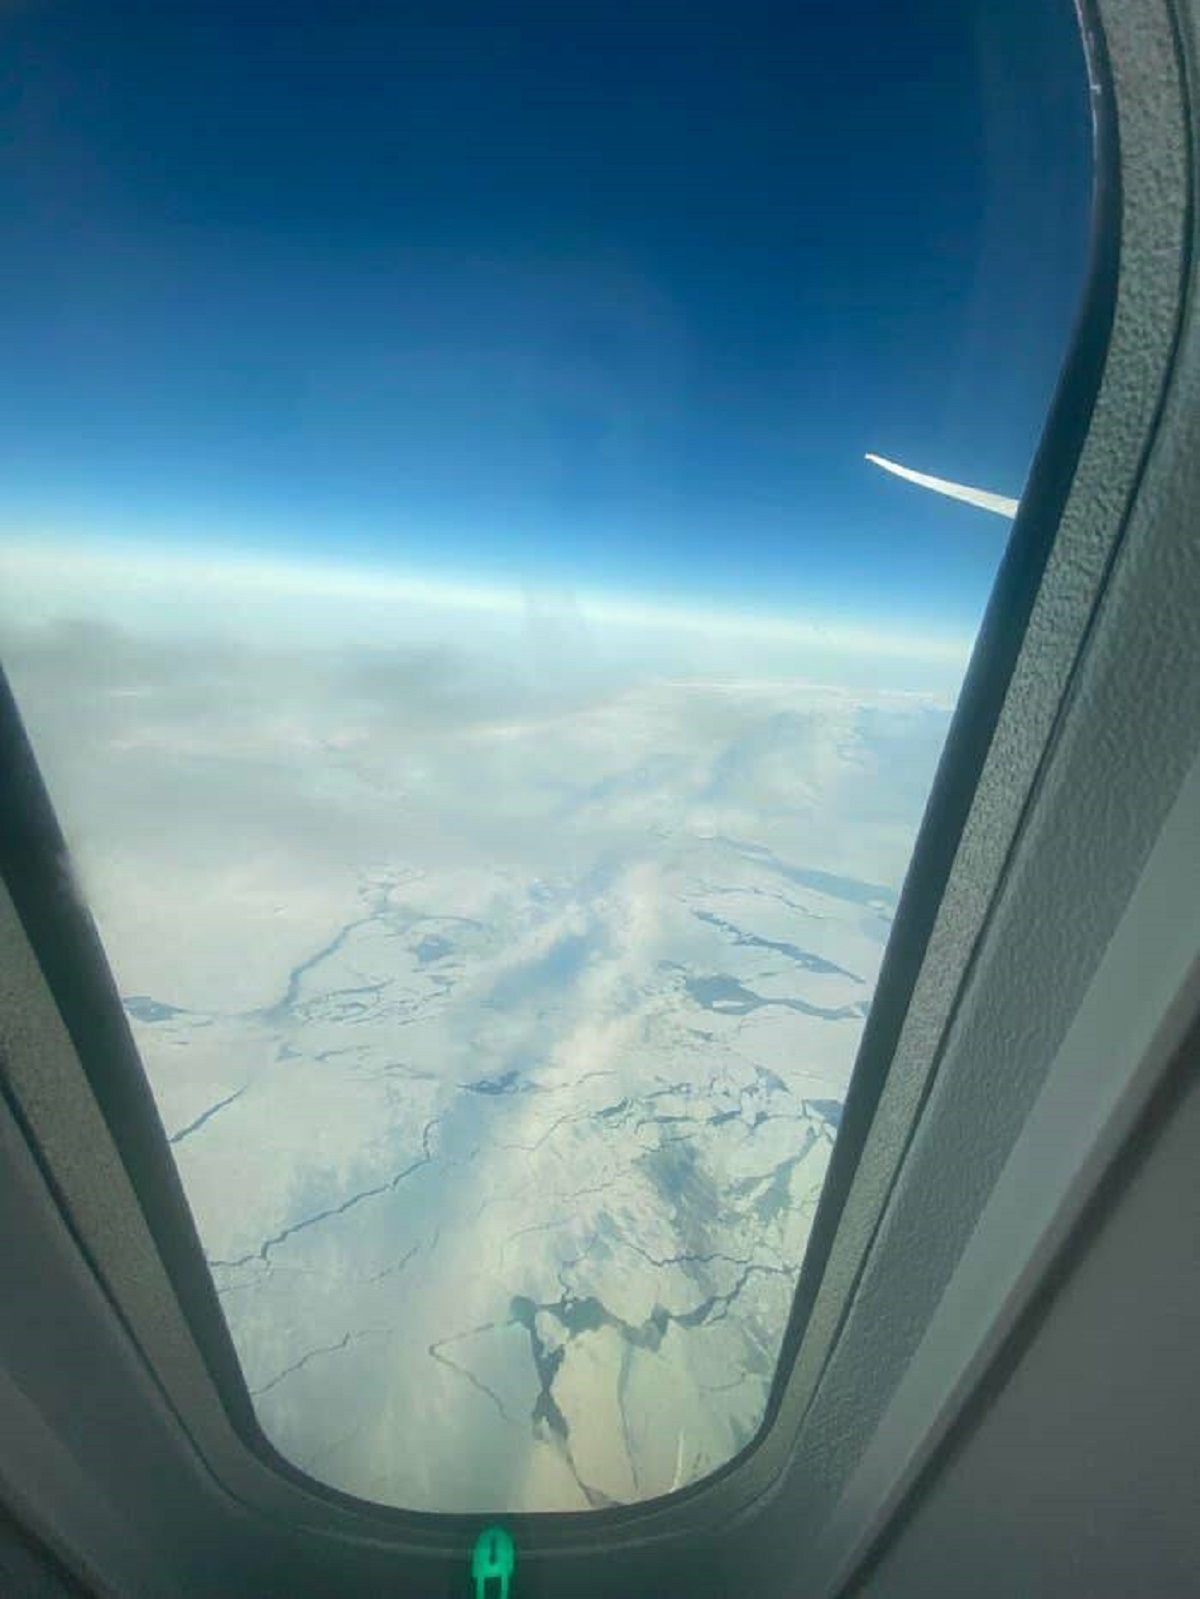 This is what Antarctica looks like from the window of a plane: